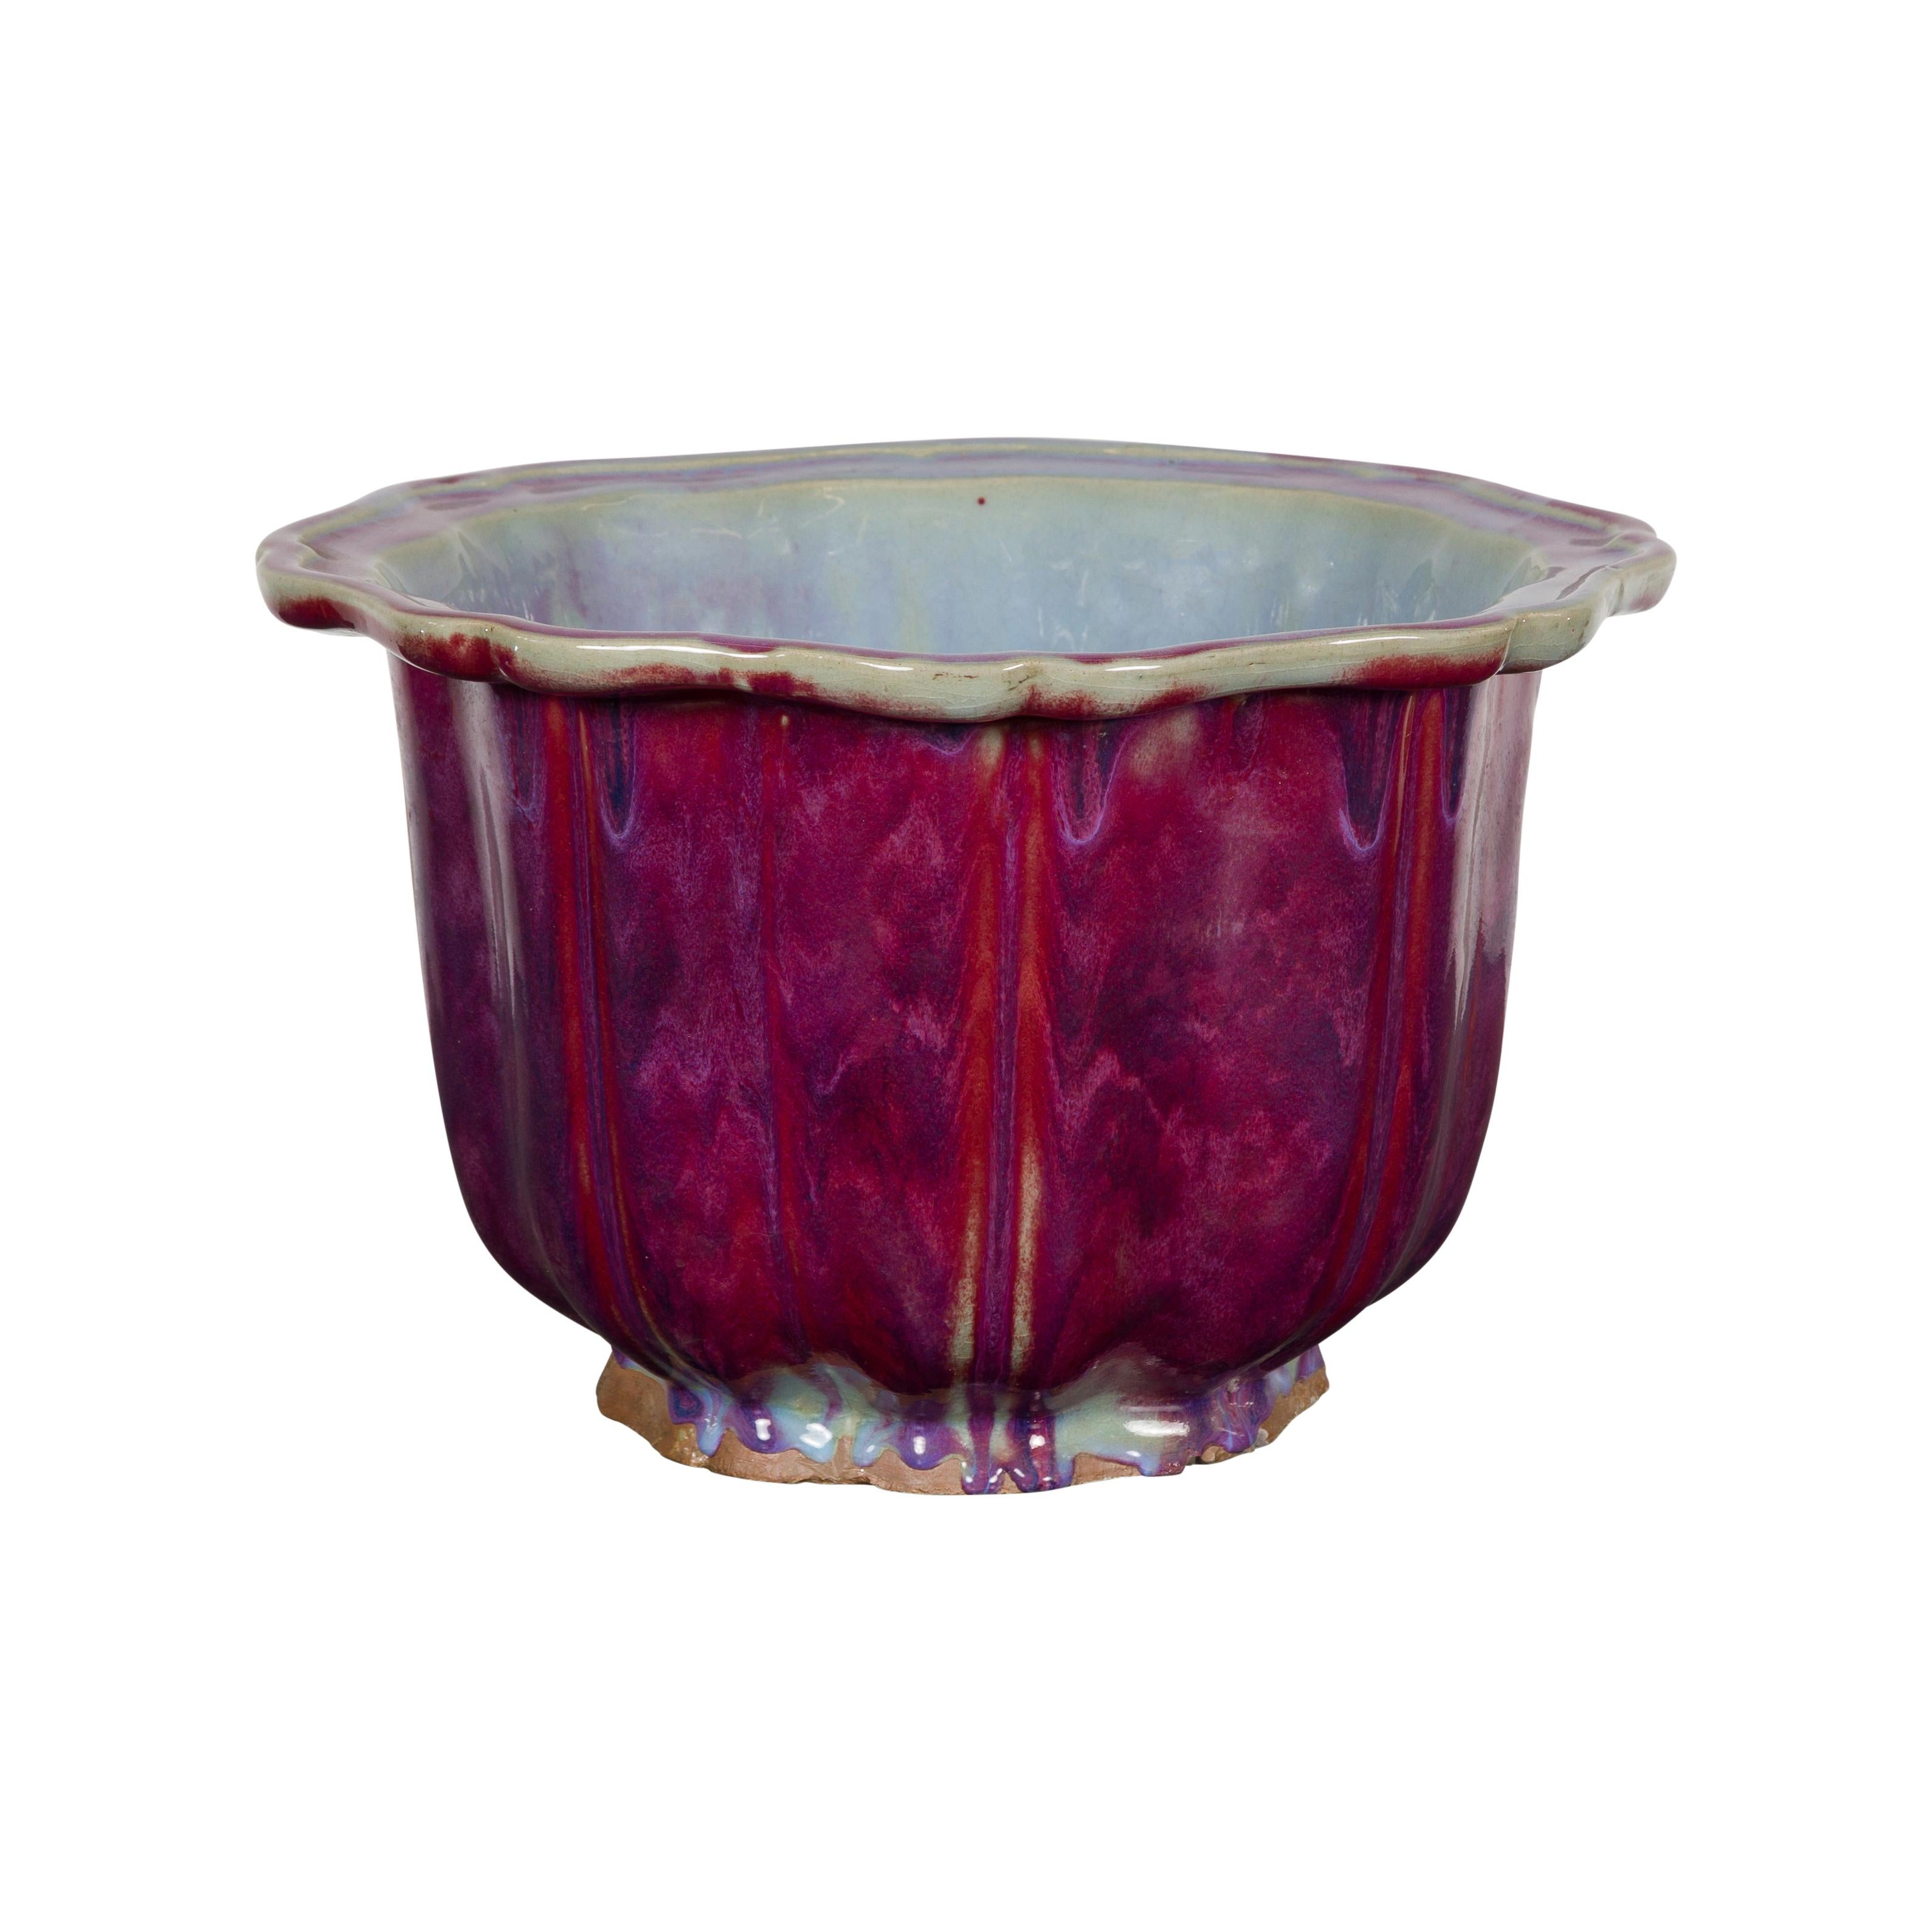 Vintage Chinese Purple, Blue and Red Glazed Flower Pot with Scalloped Top 13